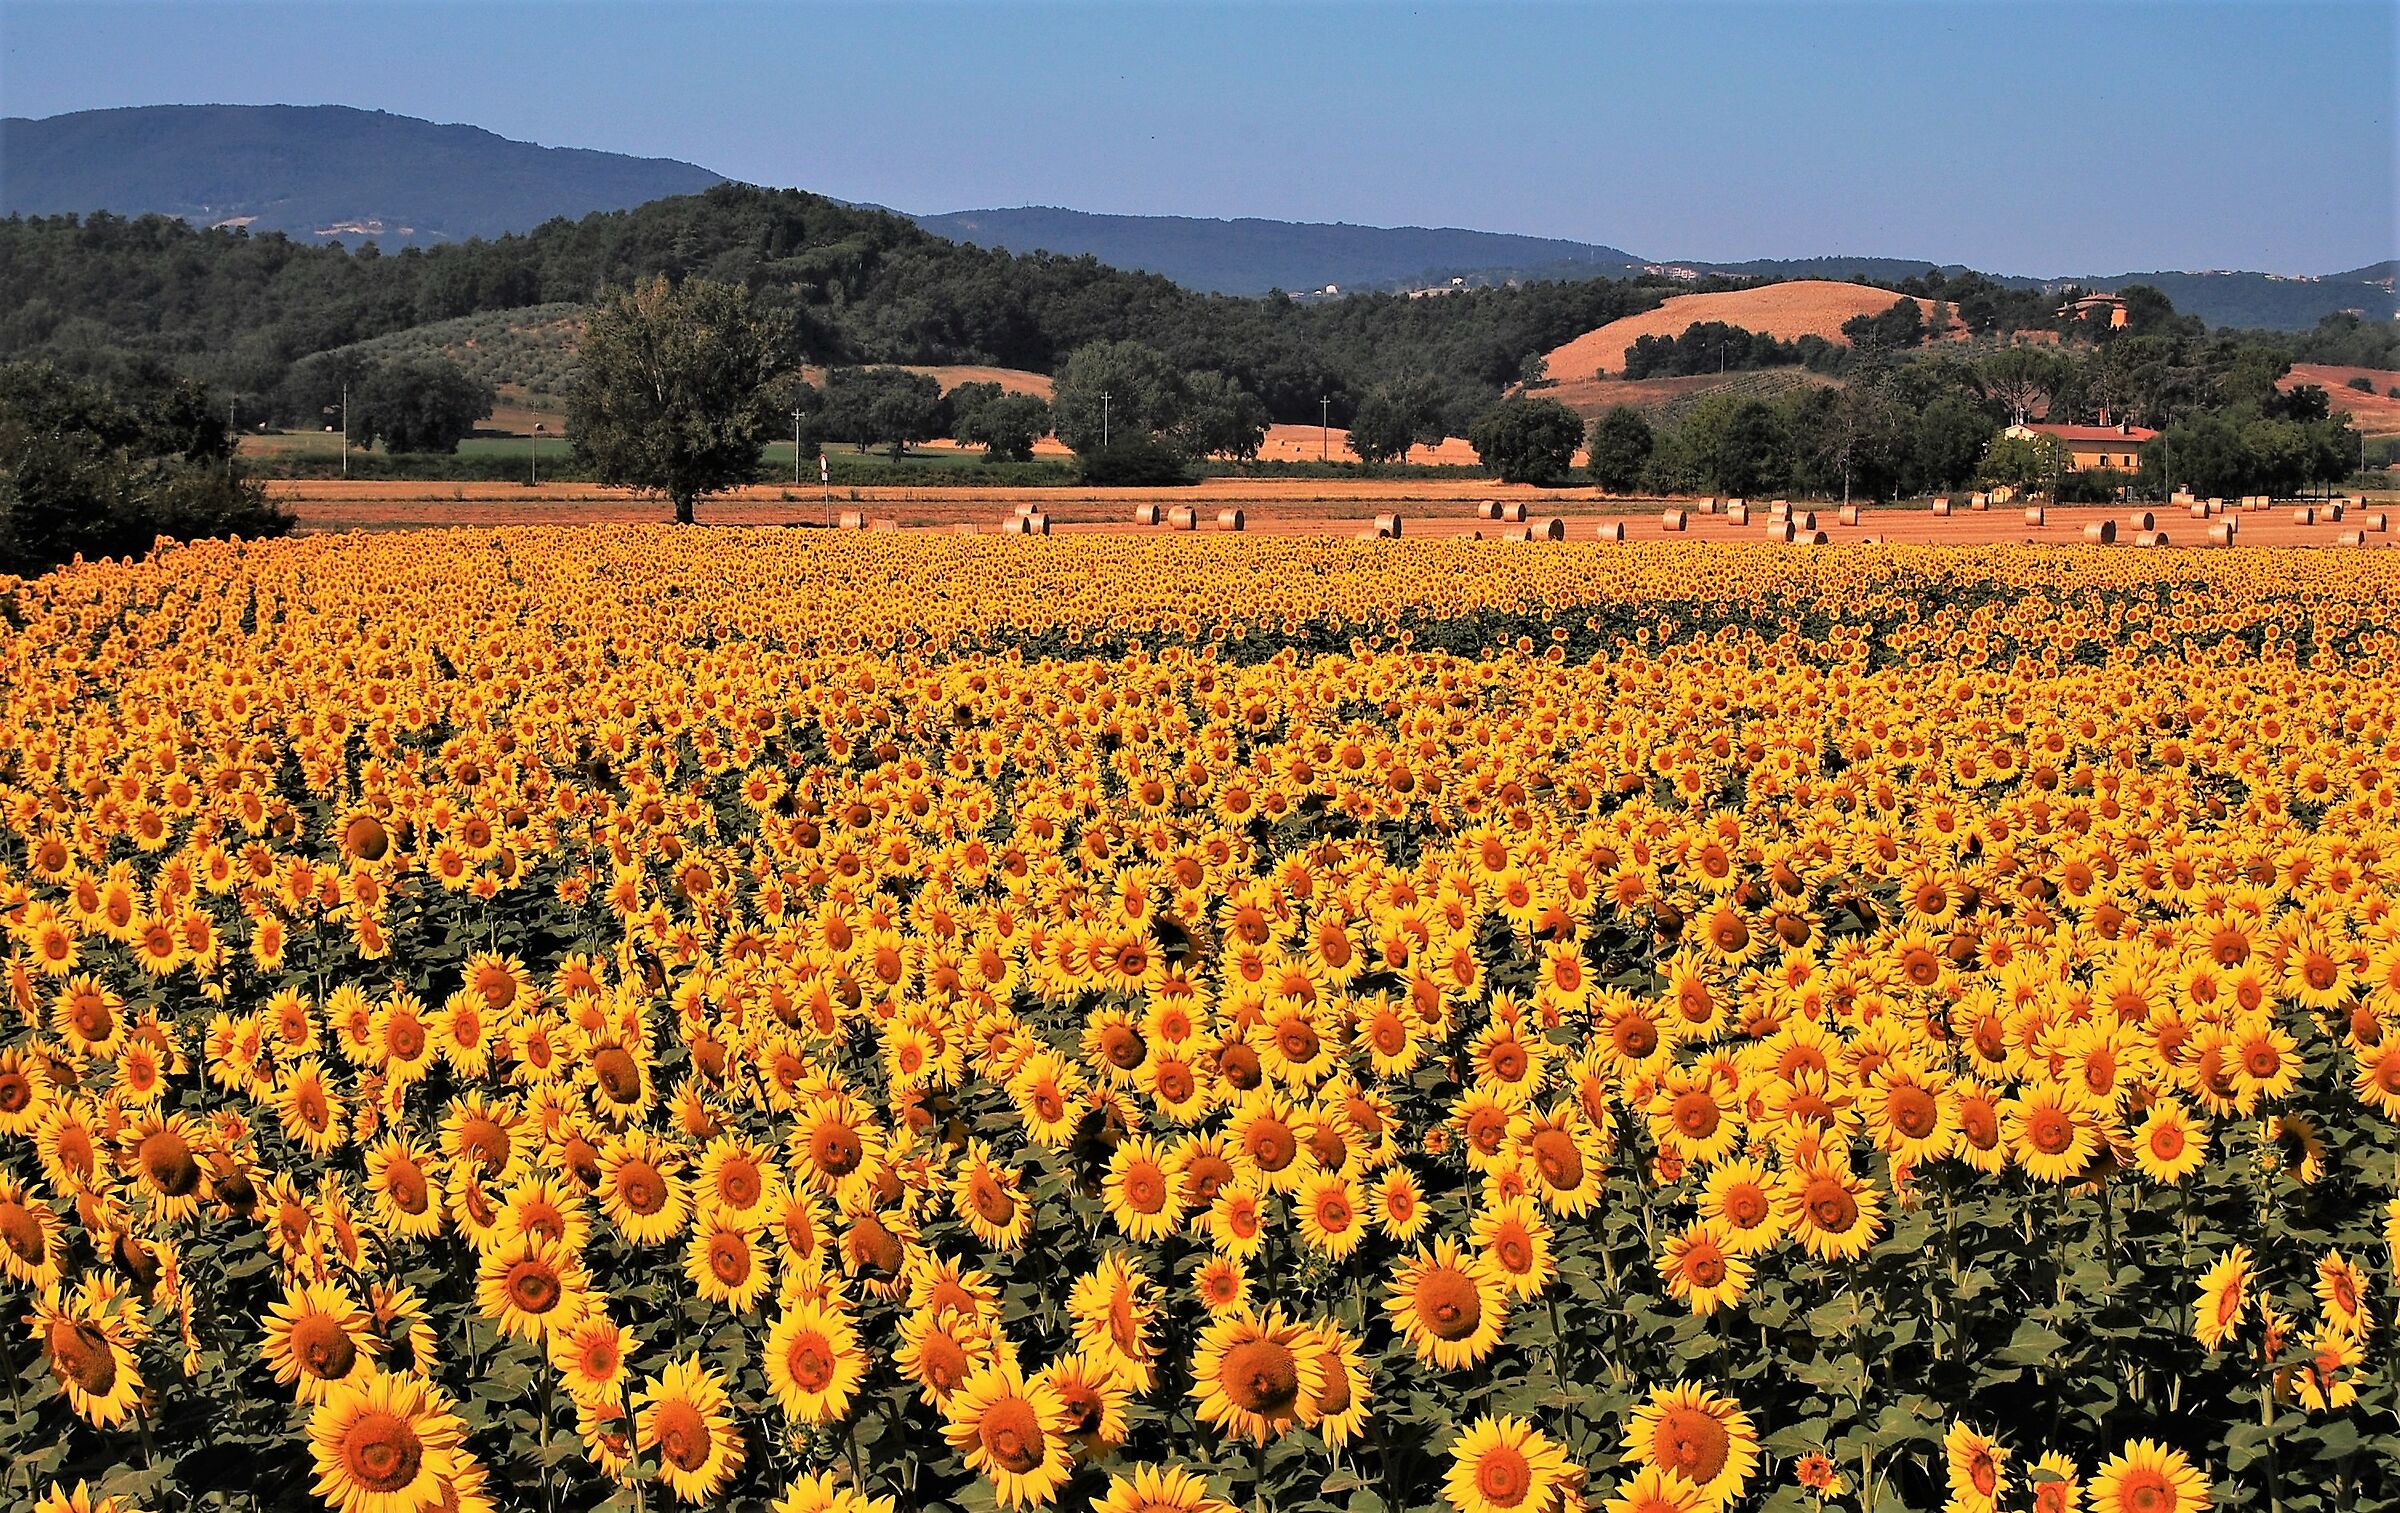 The sunflowers of the Chiana Valley...